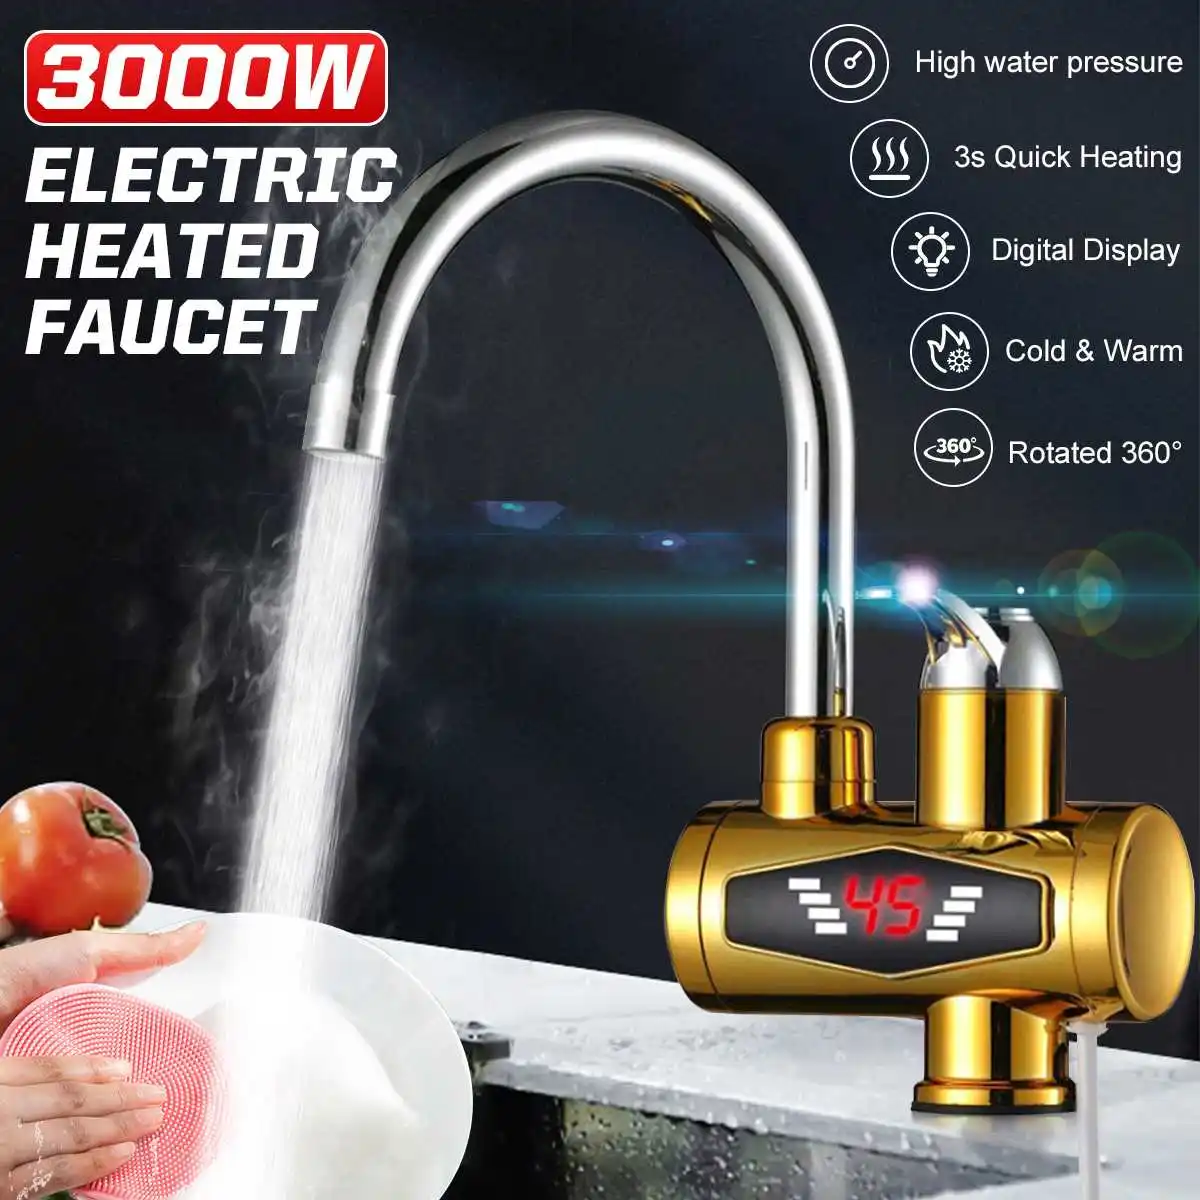 

3KW 220V Gold Electric Water Faucet Heater Tankless Electric Water Heater Led Digital Display Bathroom Kitchen Heater Faucet